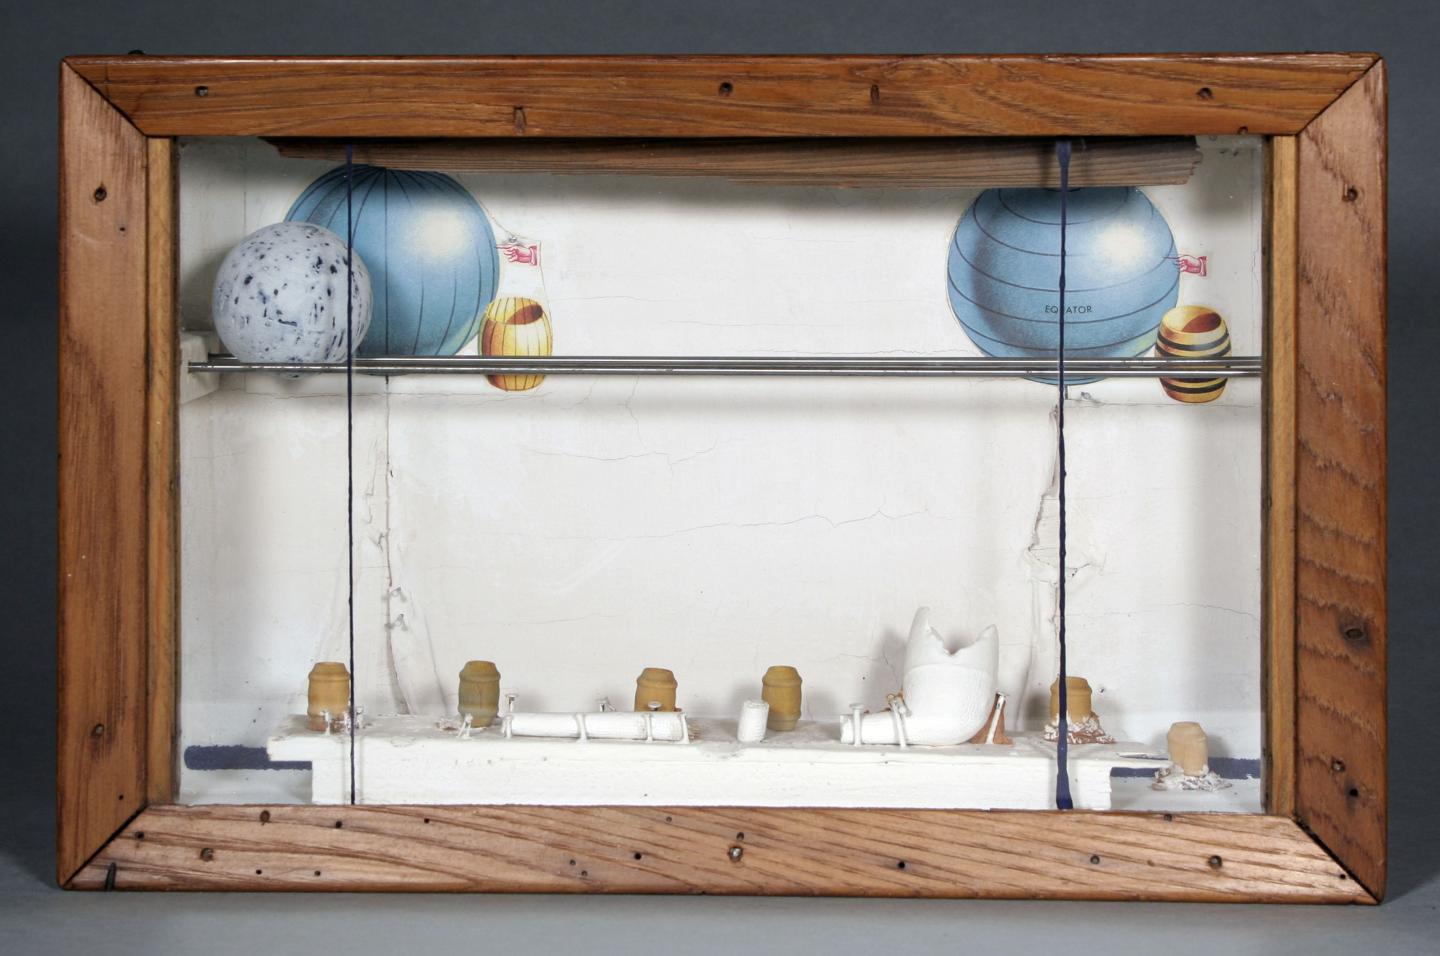 Joseph Cornell (American, 1903 - 1972) 'Untitled (Soap Bubble Set, Latitude and Longitude Box)', ca. 1960 Box construction 10 x 15 ½ x 4 ¼ in. Gift of The Joseph and Robert Cornell Memorial Foundation, 2002.15.4 Courtesy of The Fralin Museum of Art at the University of Virginia © 2022 The Joseph and Robert Cornell Memorial Foundation / Licensed by VAGA at Artists Rights Society (ARS), NY